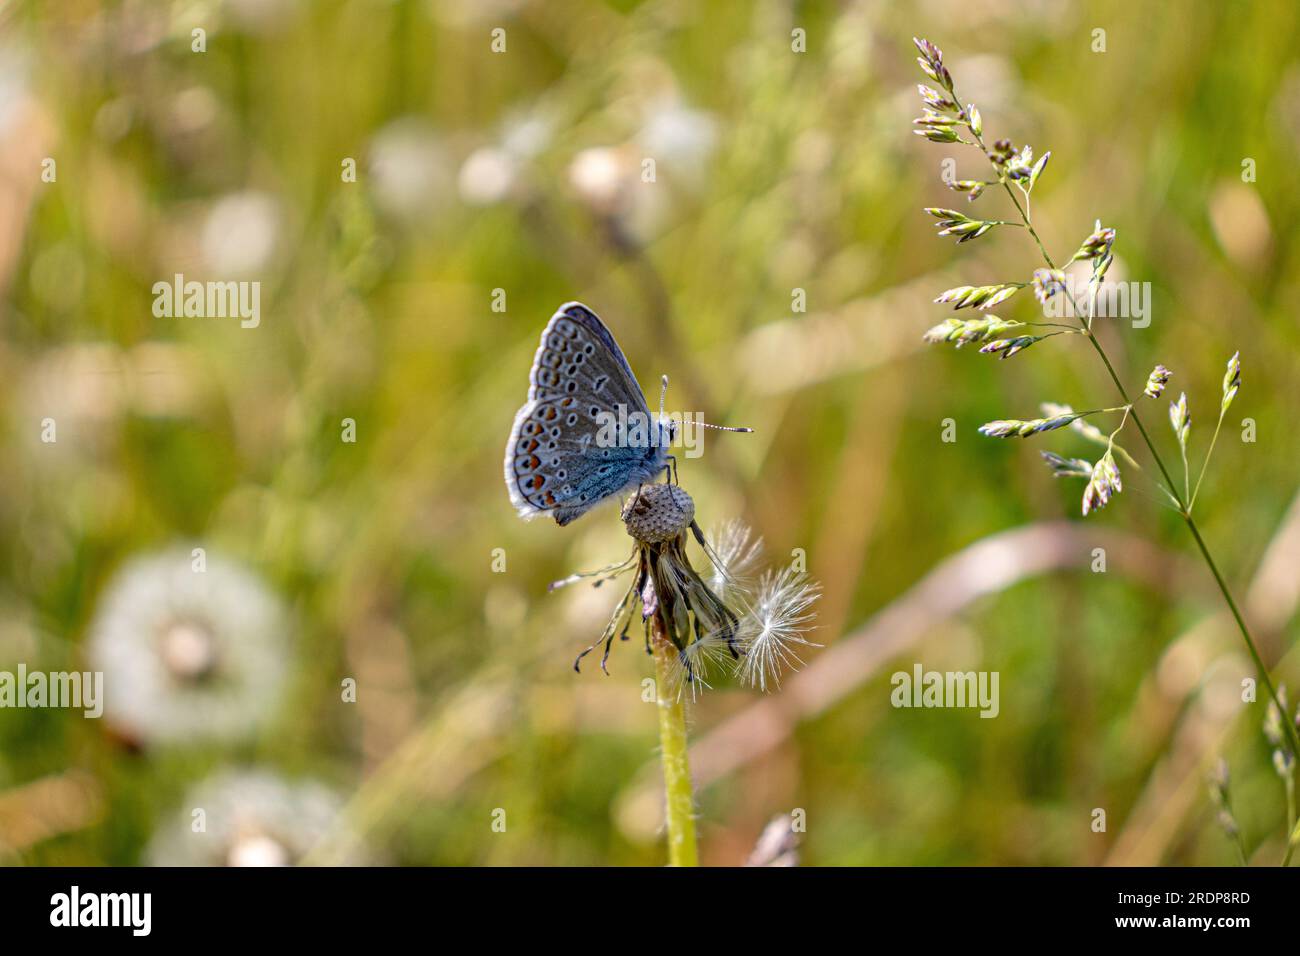 Common Blue butterfly with black spots on wings perched on a dried dandelion flower - facing right - blurred tall grass background Stock Photo